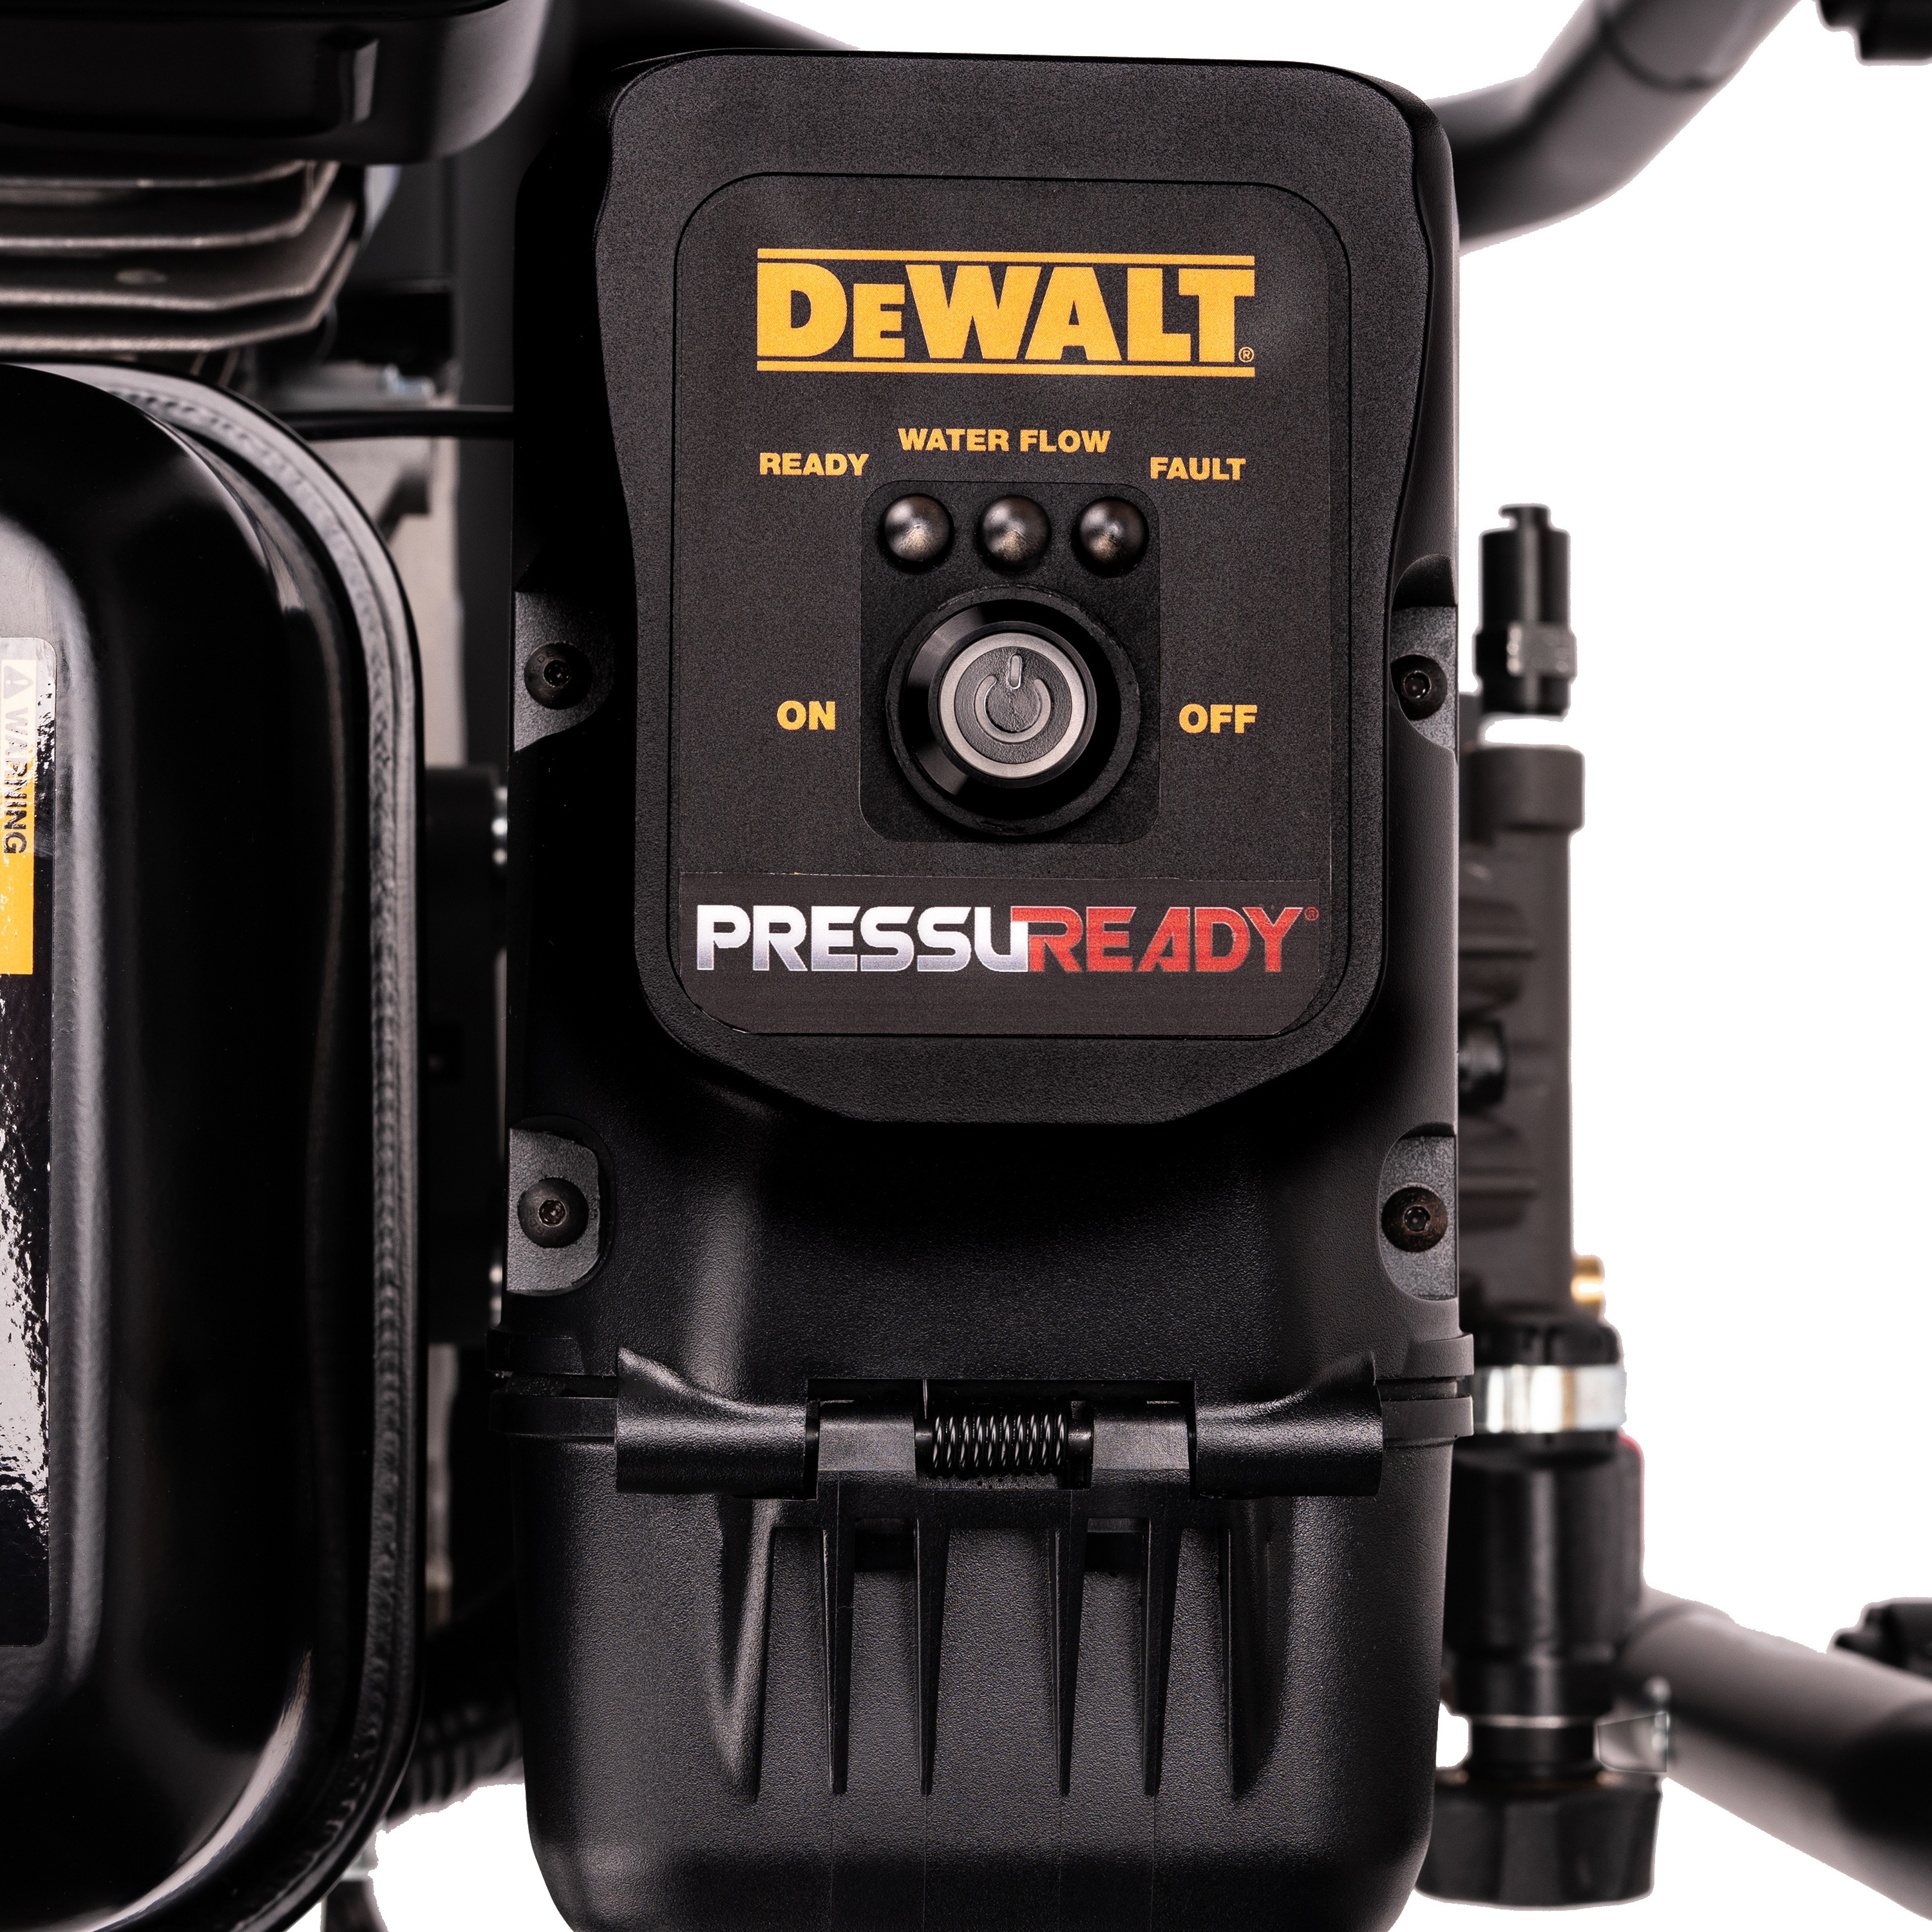 Smart Control panel feature of PressuReady 3400 PSI at 2.5 GPM Powered Cold Water Gas Pressure Washer.